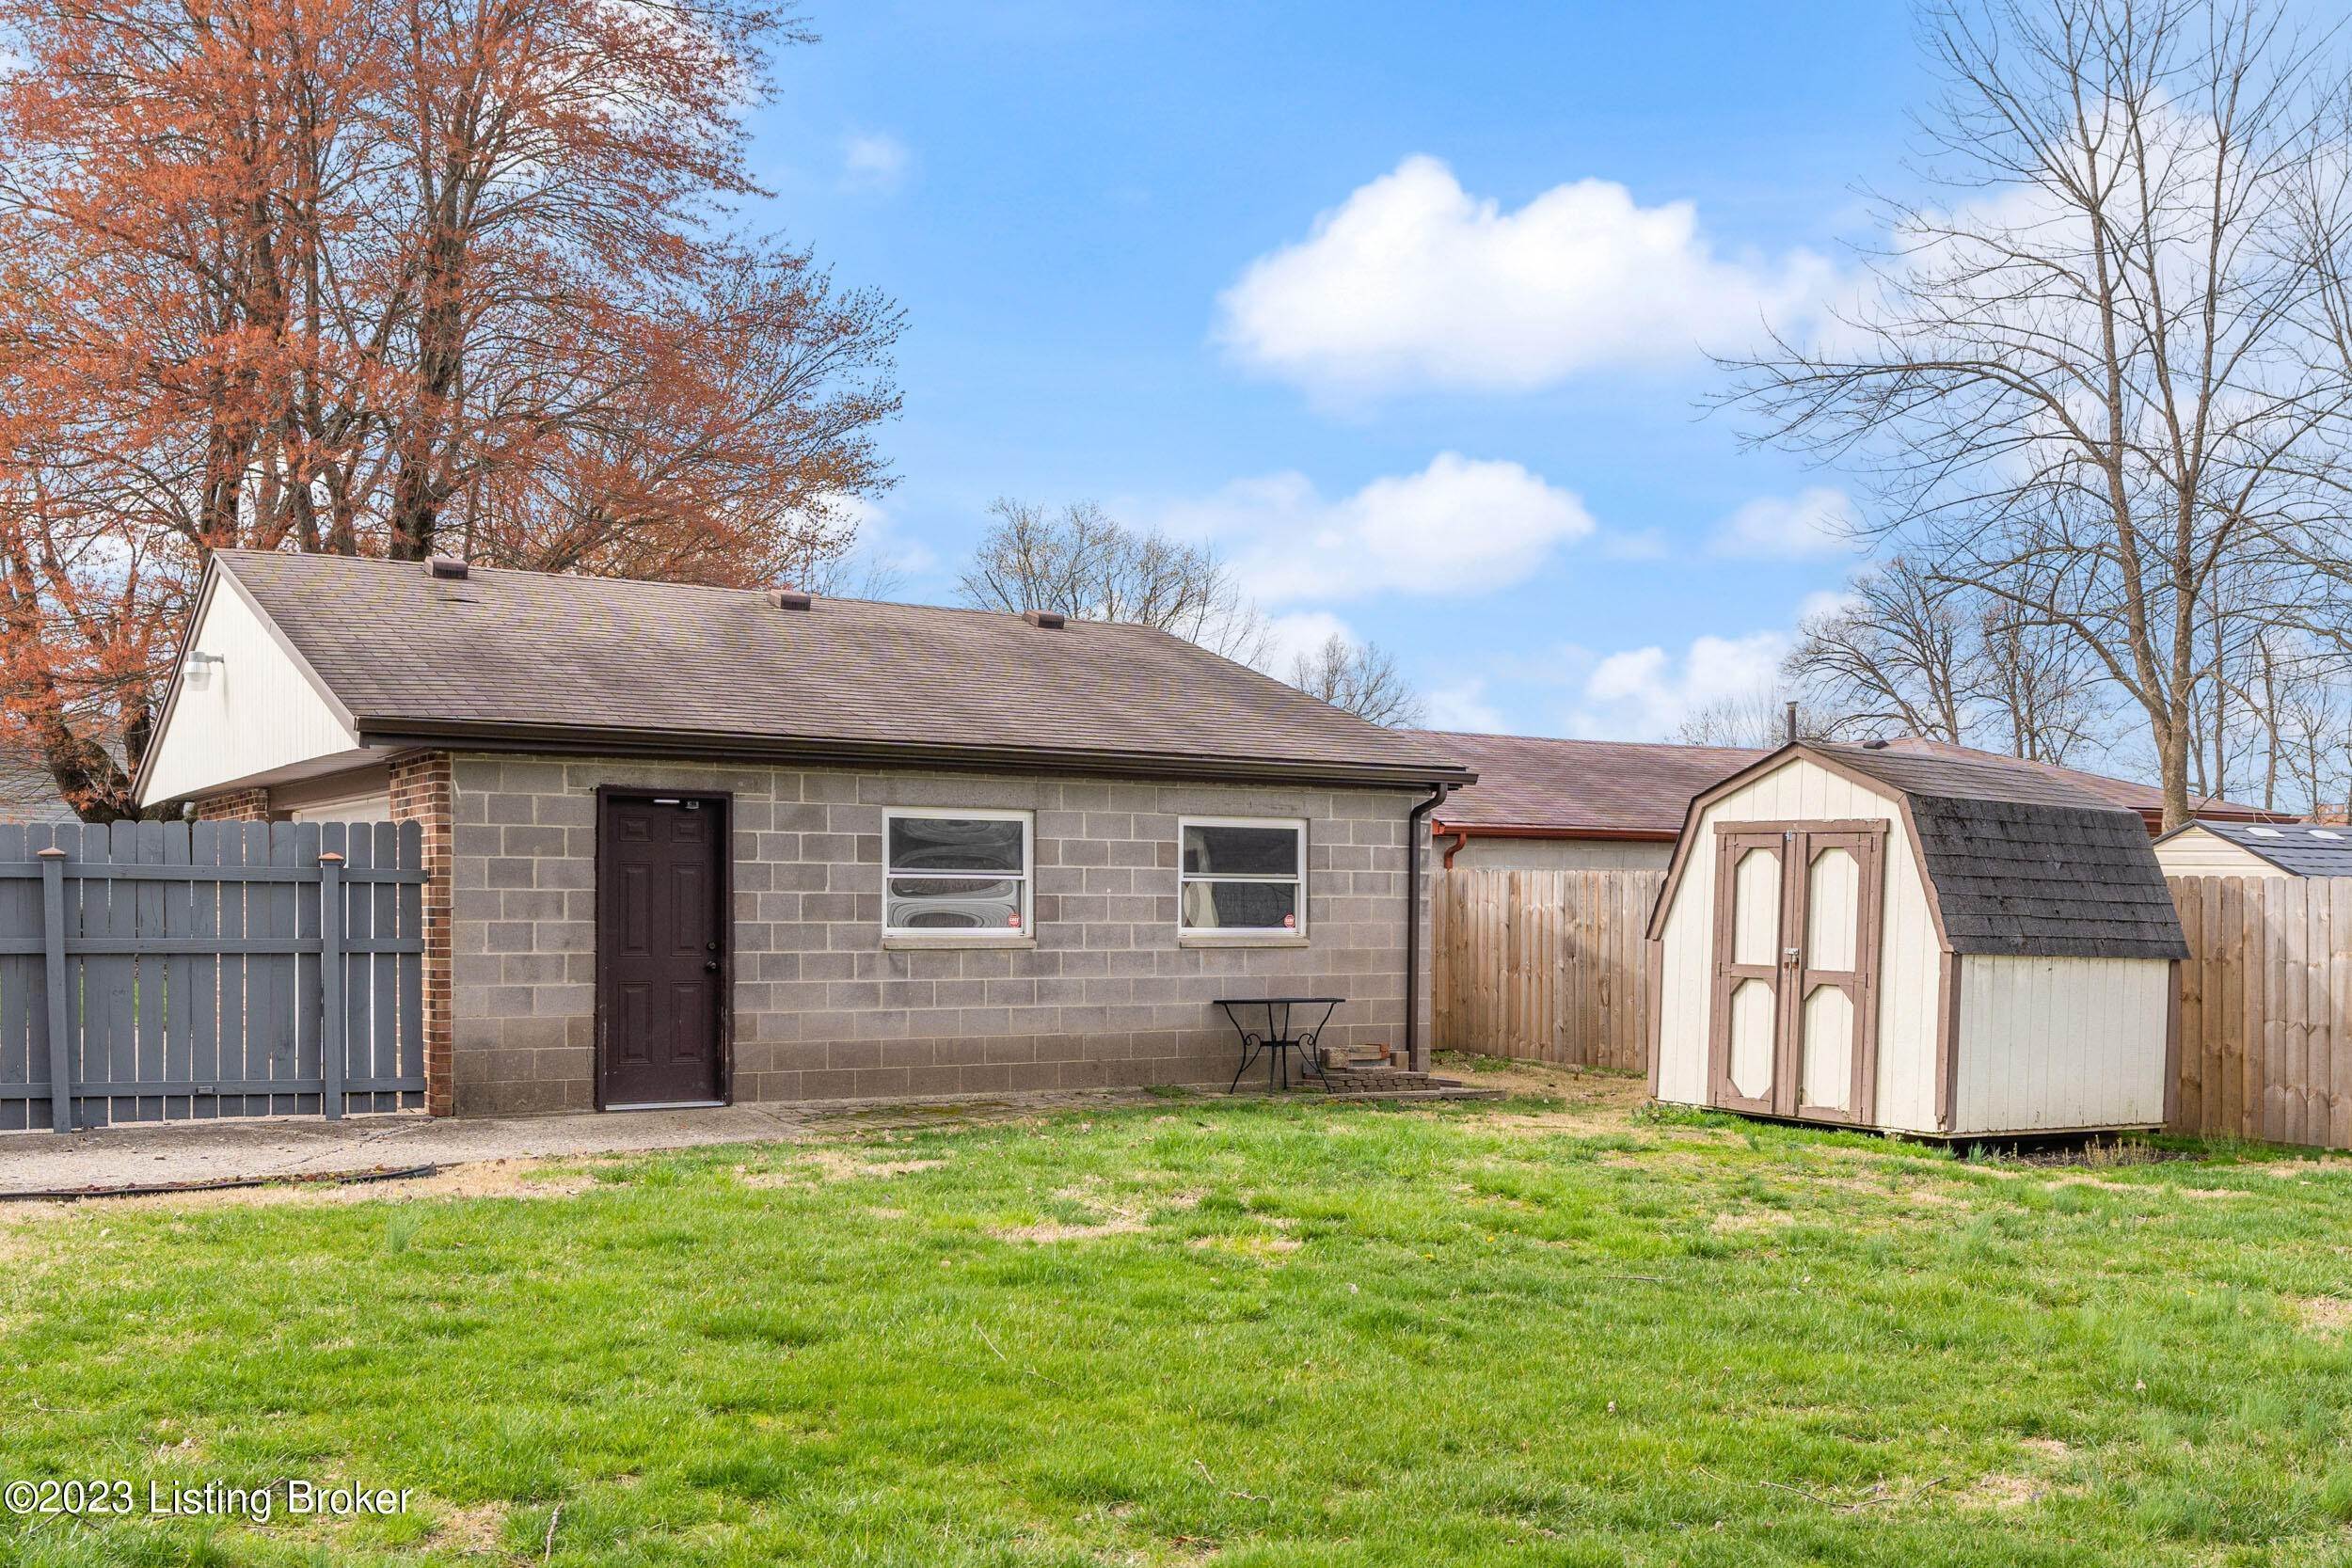 27. Single Family at Louisville, KY 40229